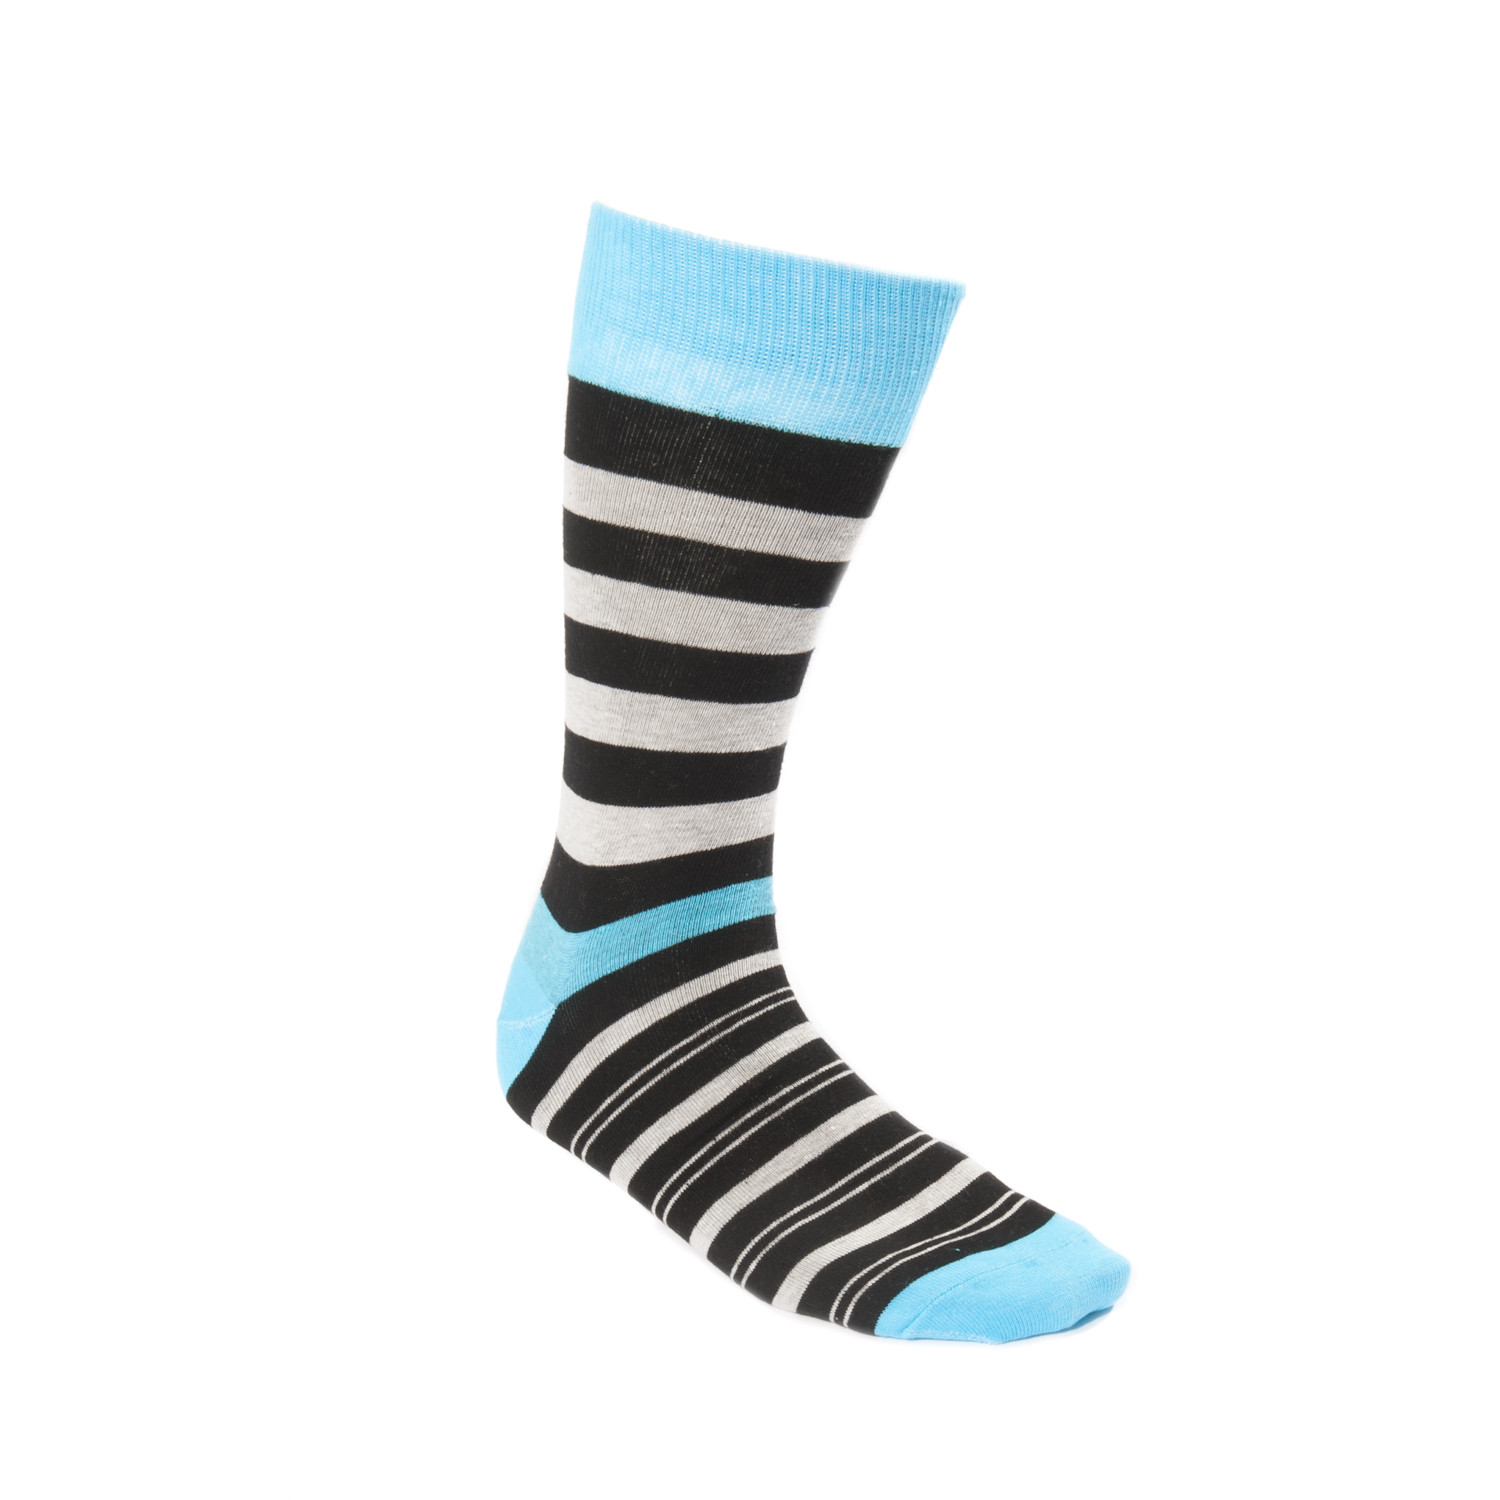 Fancy Men's Socks // Black and Blue Stripe - English Laundry - Touch of ...